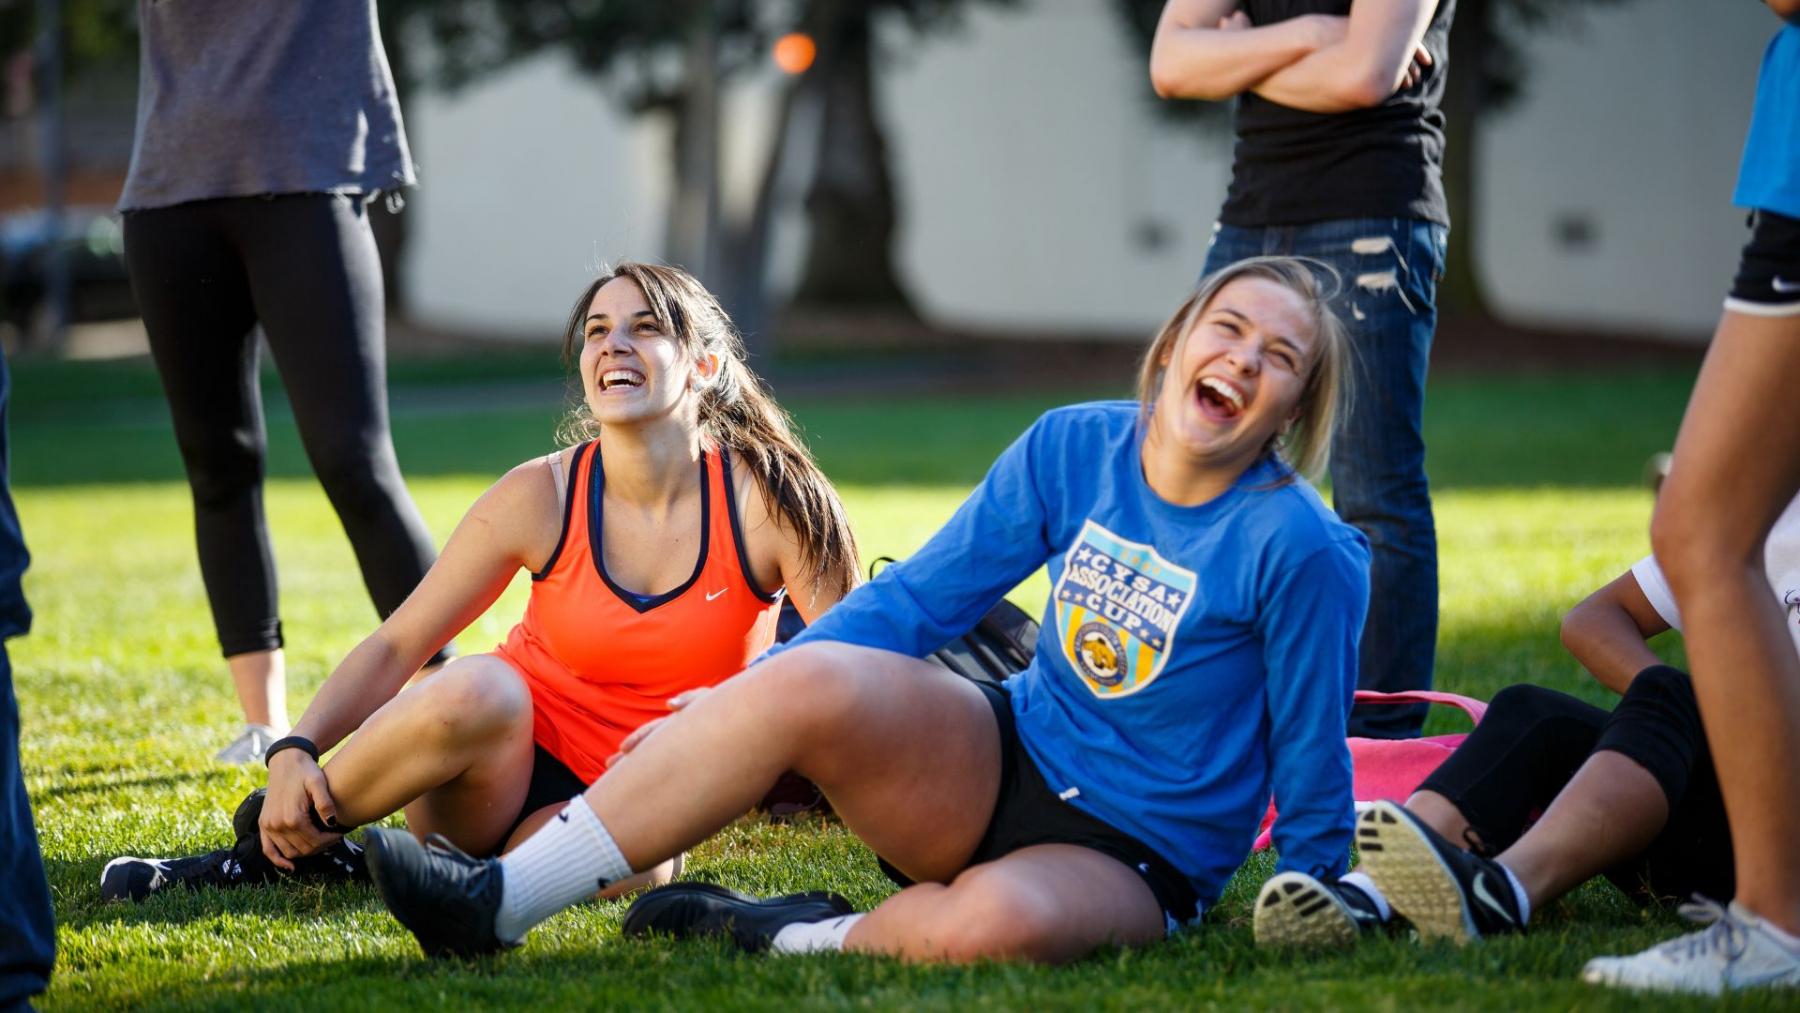 Two students on lawn laughing during competition